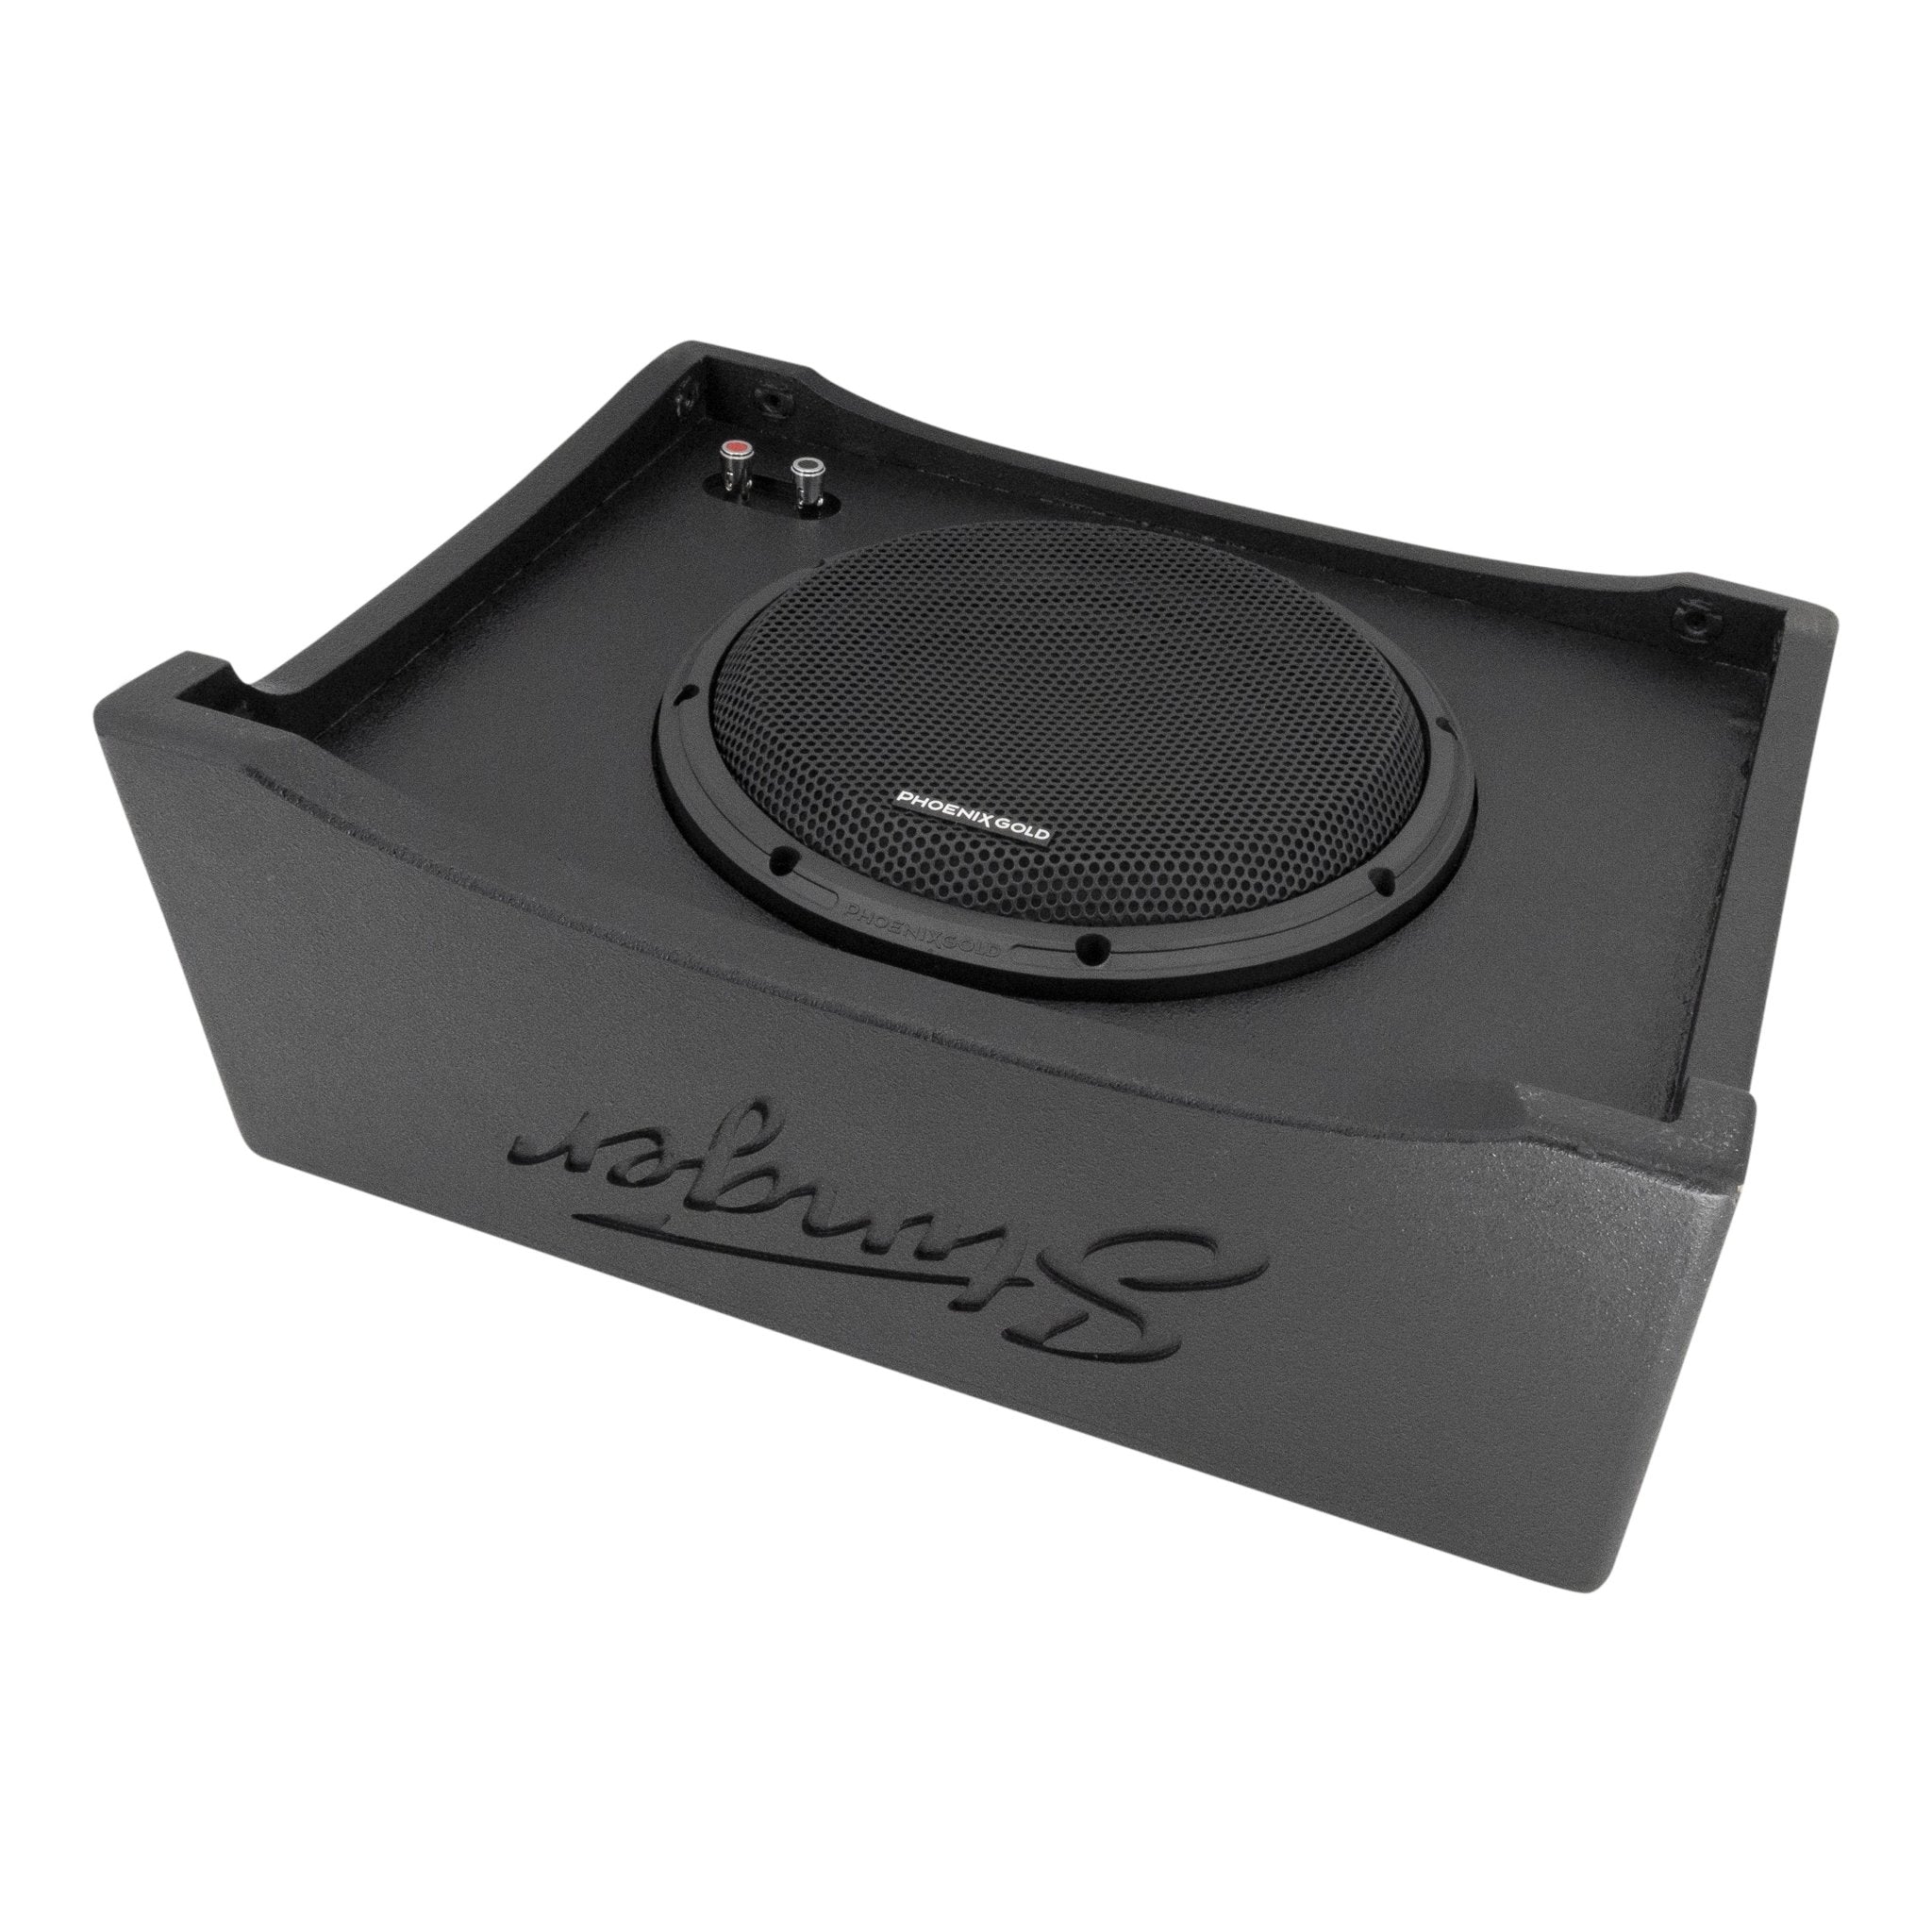 10" 400 Watt (RMS) Under-Seat Loaded Ported Subwoofer Enclosure Bass Package for Chevy, GMC, Ford, & Toyota Trucks